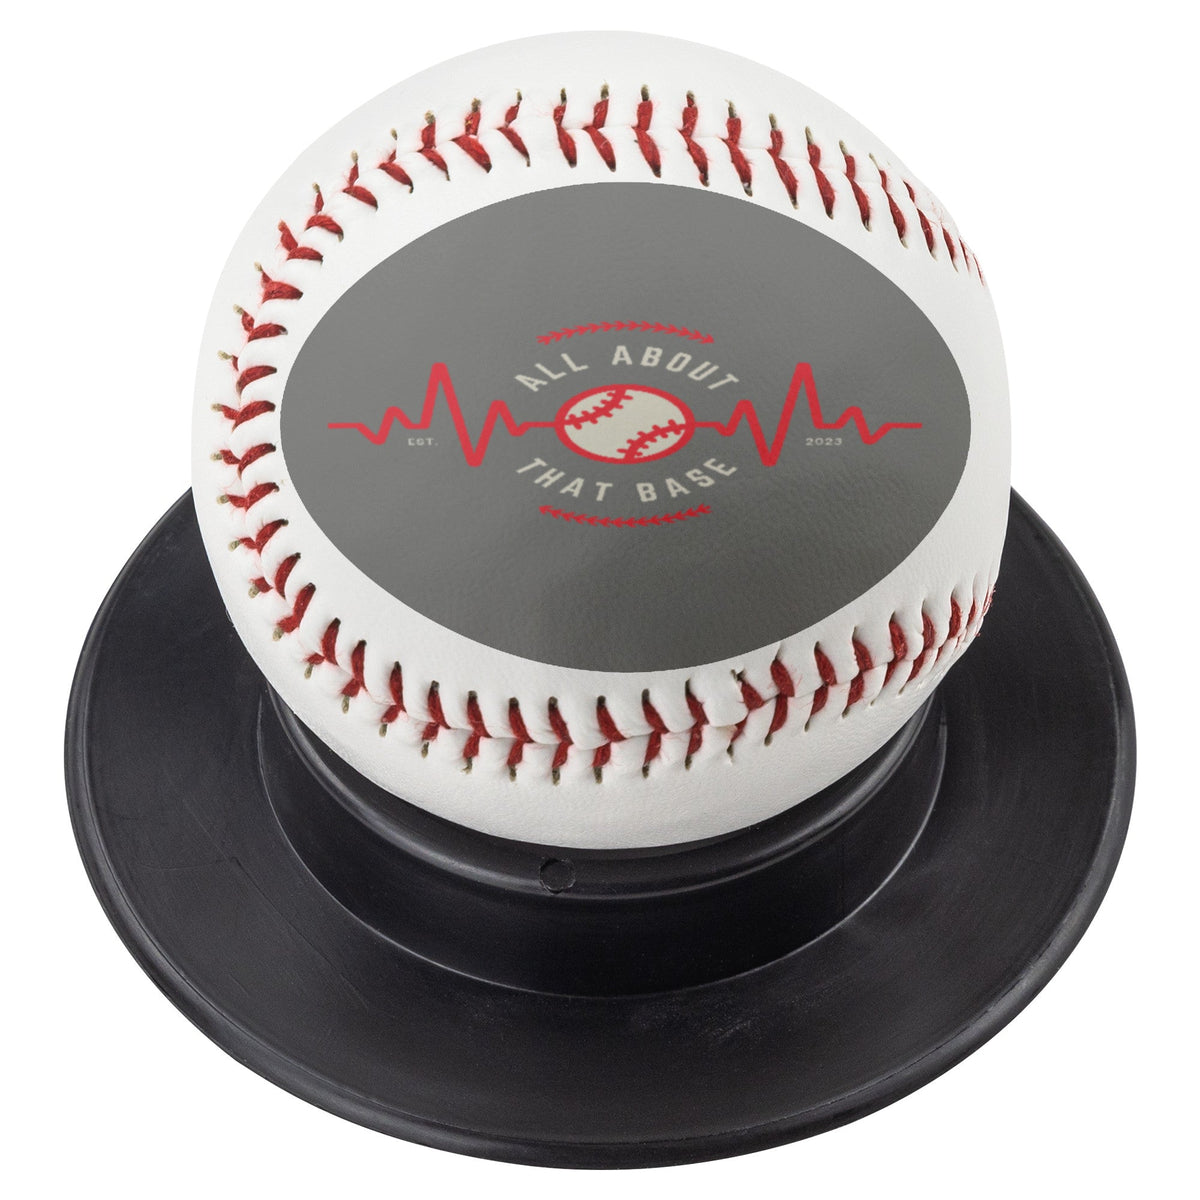 All About Baseball | Full Size Baseball | Red or Blue Thread - abrandilion